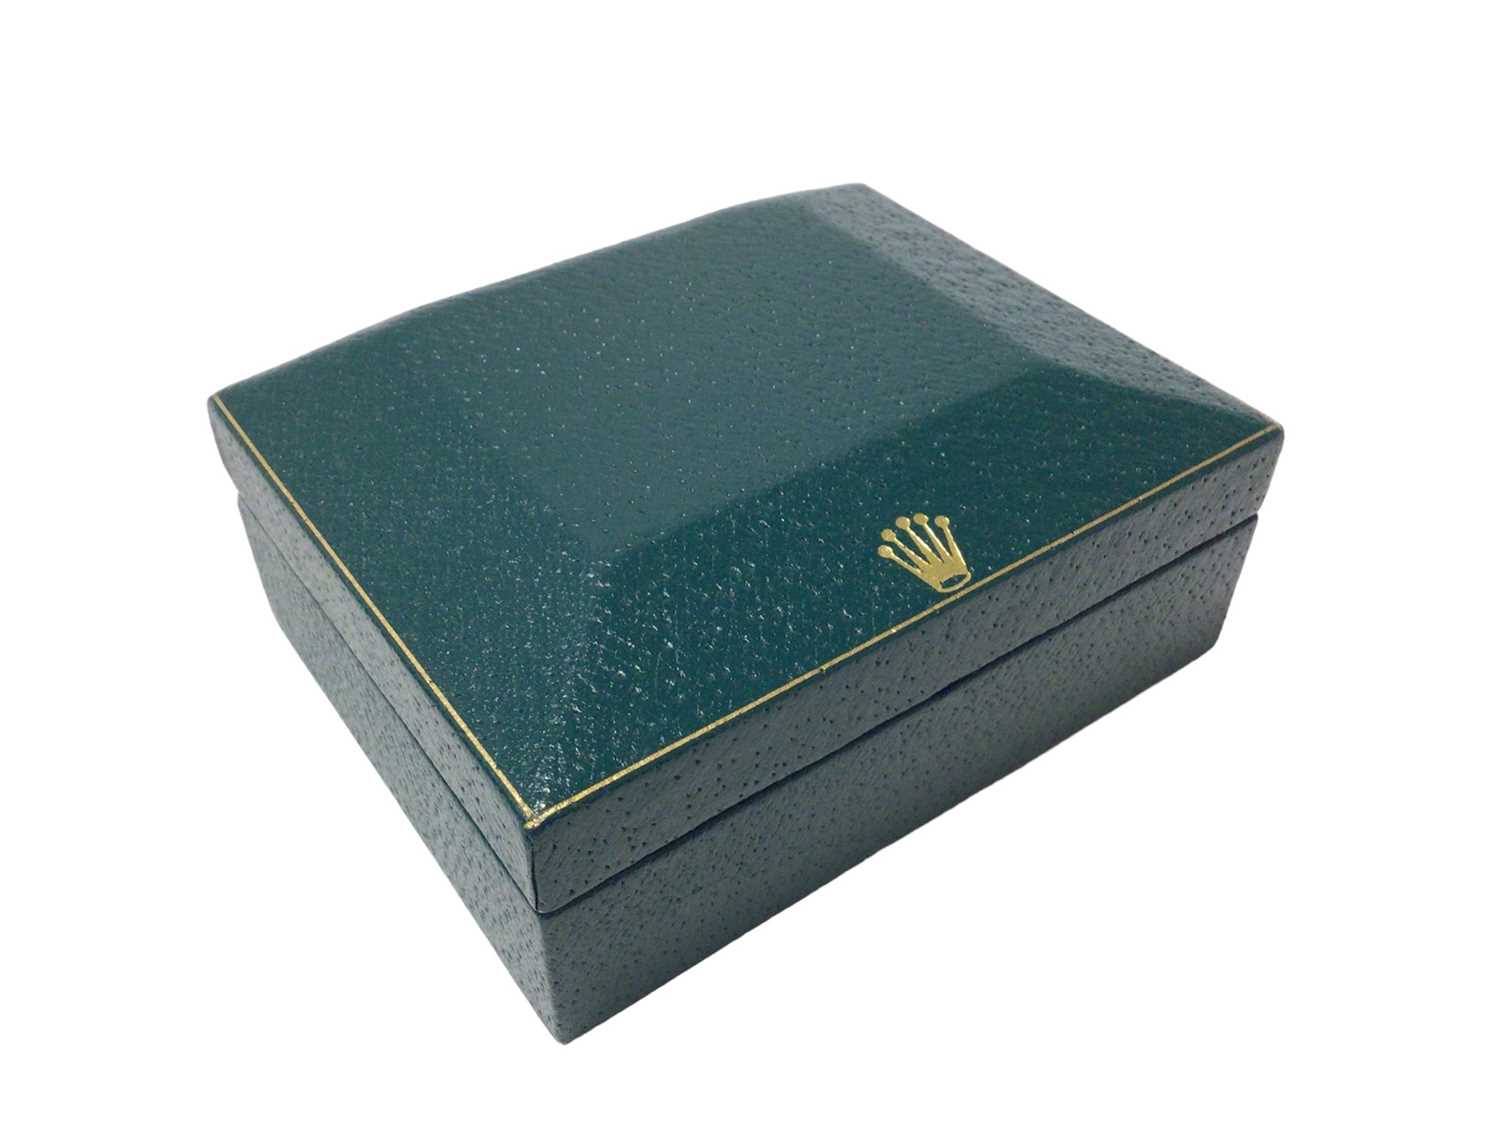 Rolex Oyster empty watch box and outer cardboard box - Image 3 of 7